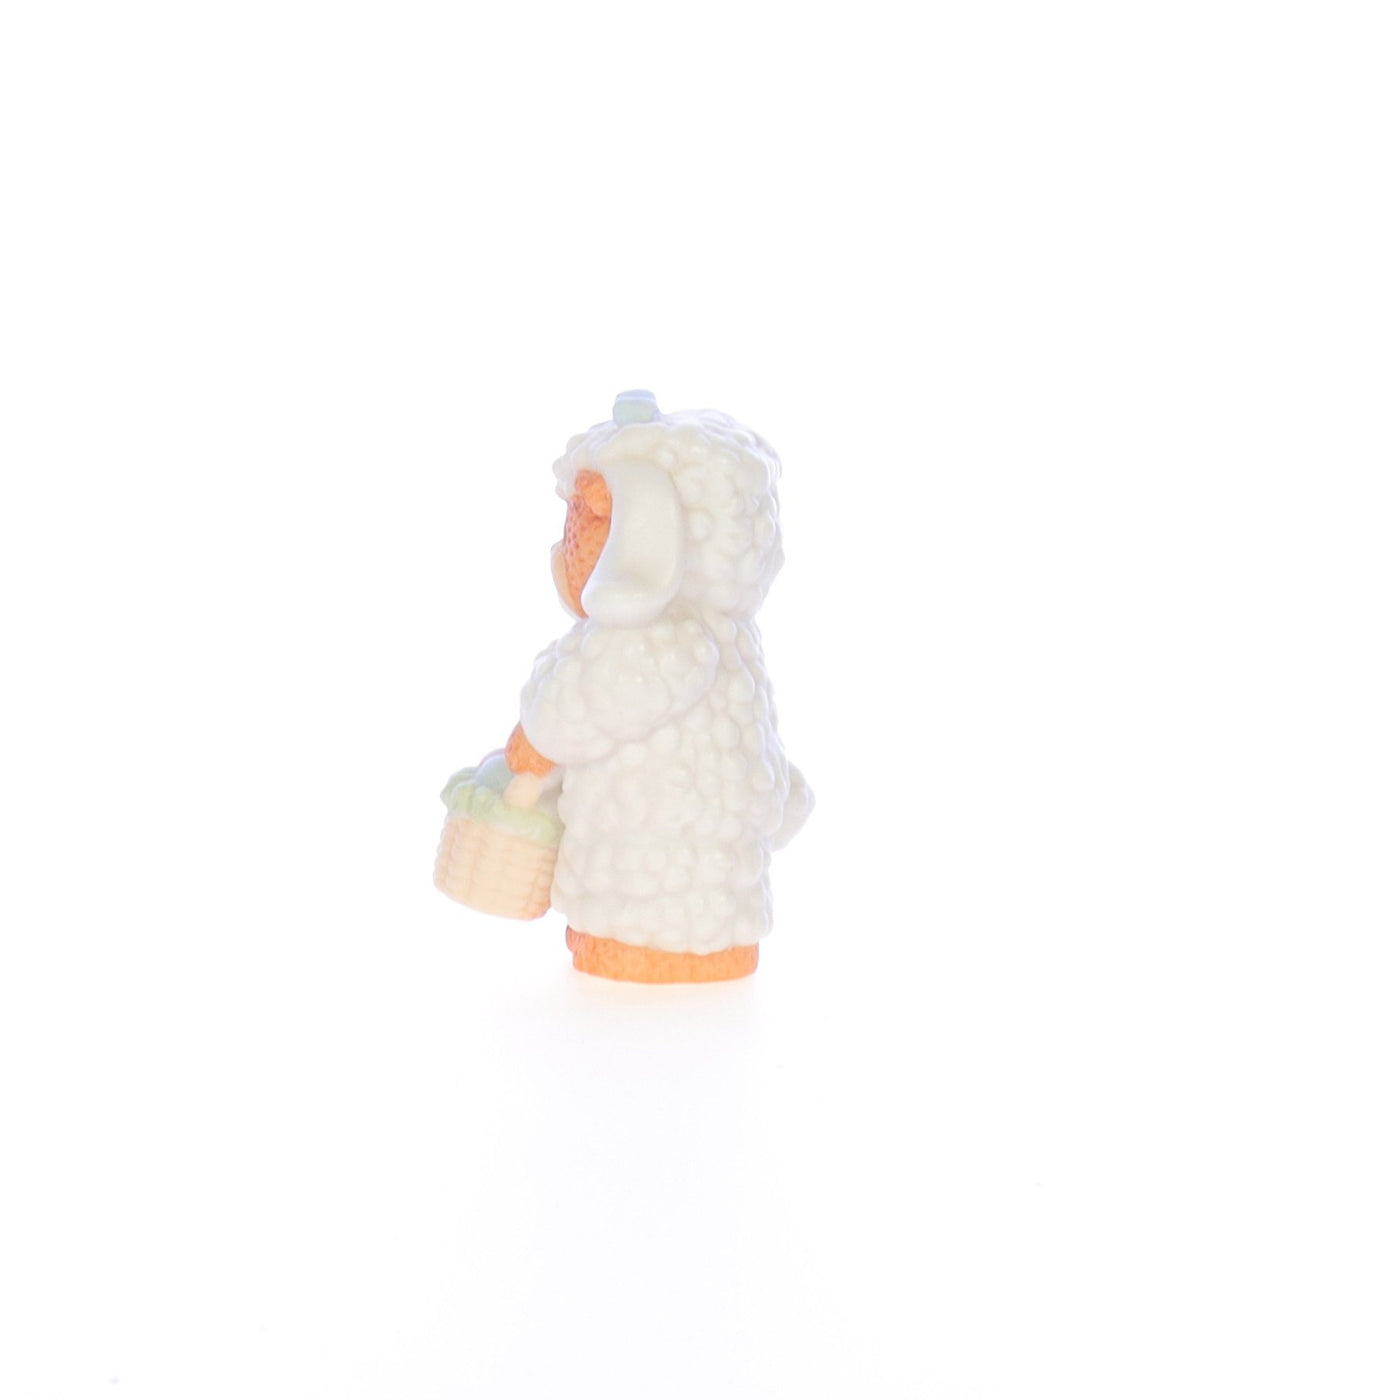 Lucy_And_Me_by_Lucy_Atwell_Porcelain_Figurine_Bear_in_Sheep_Costume_Lucy_Unknown_051_03